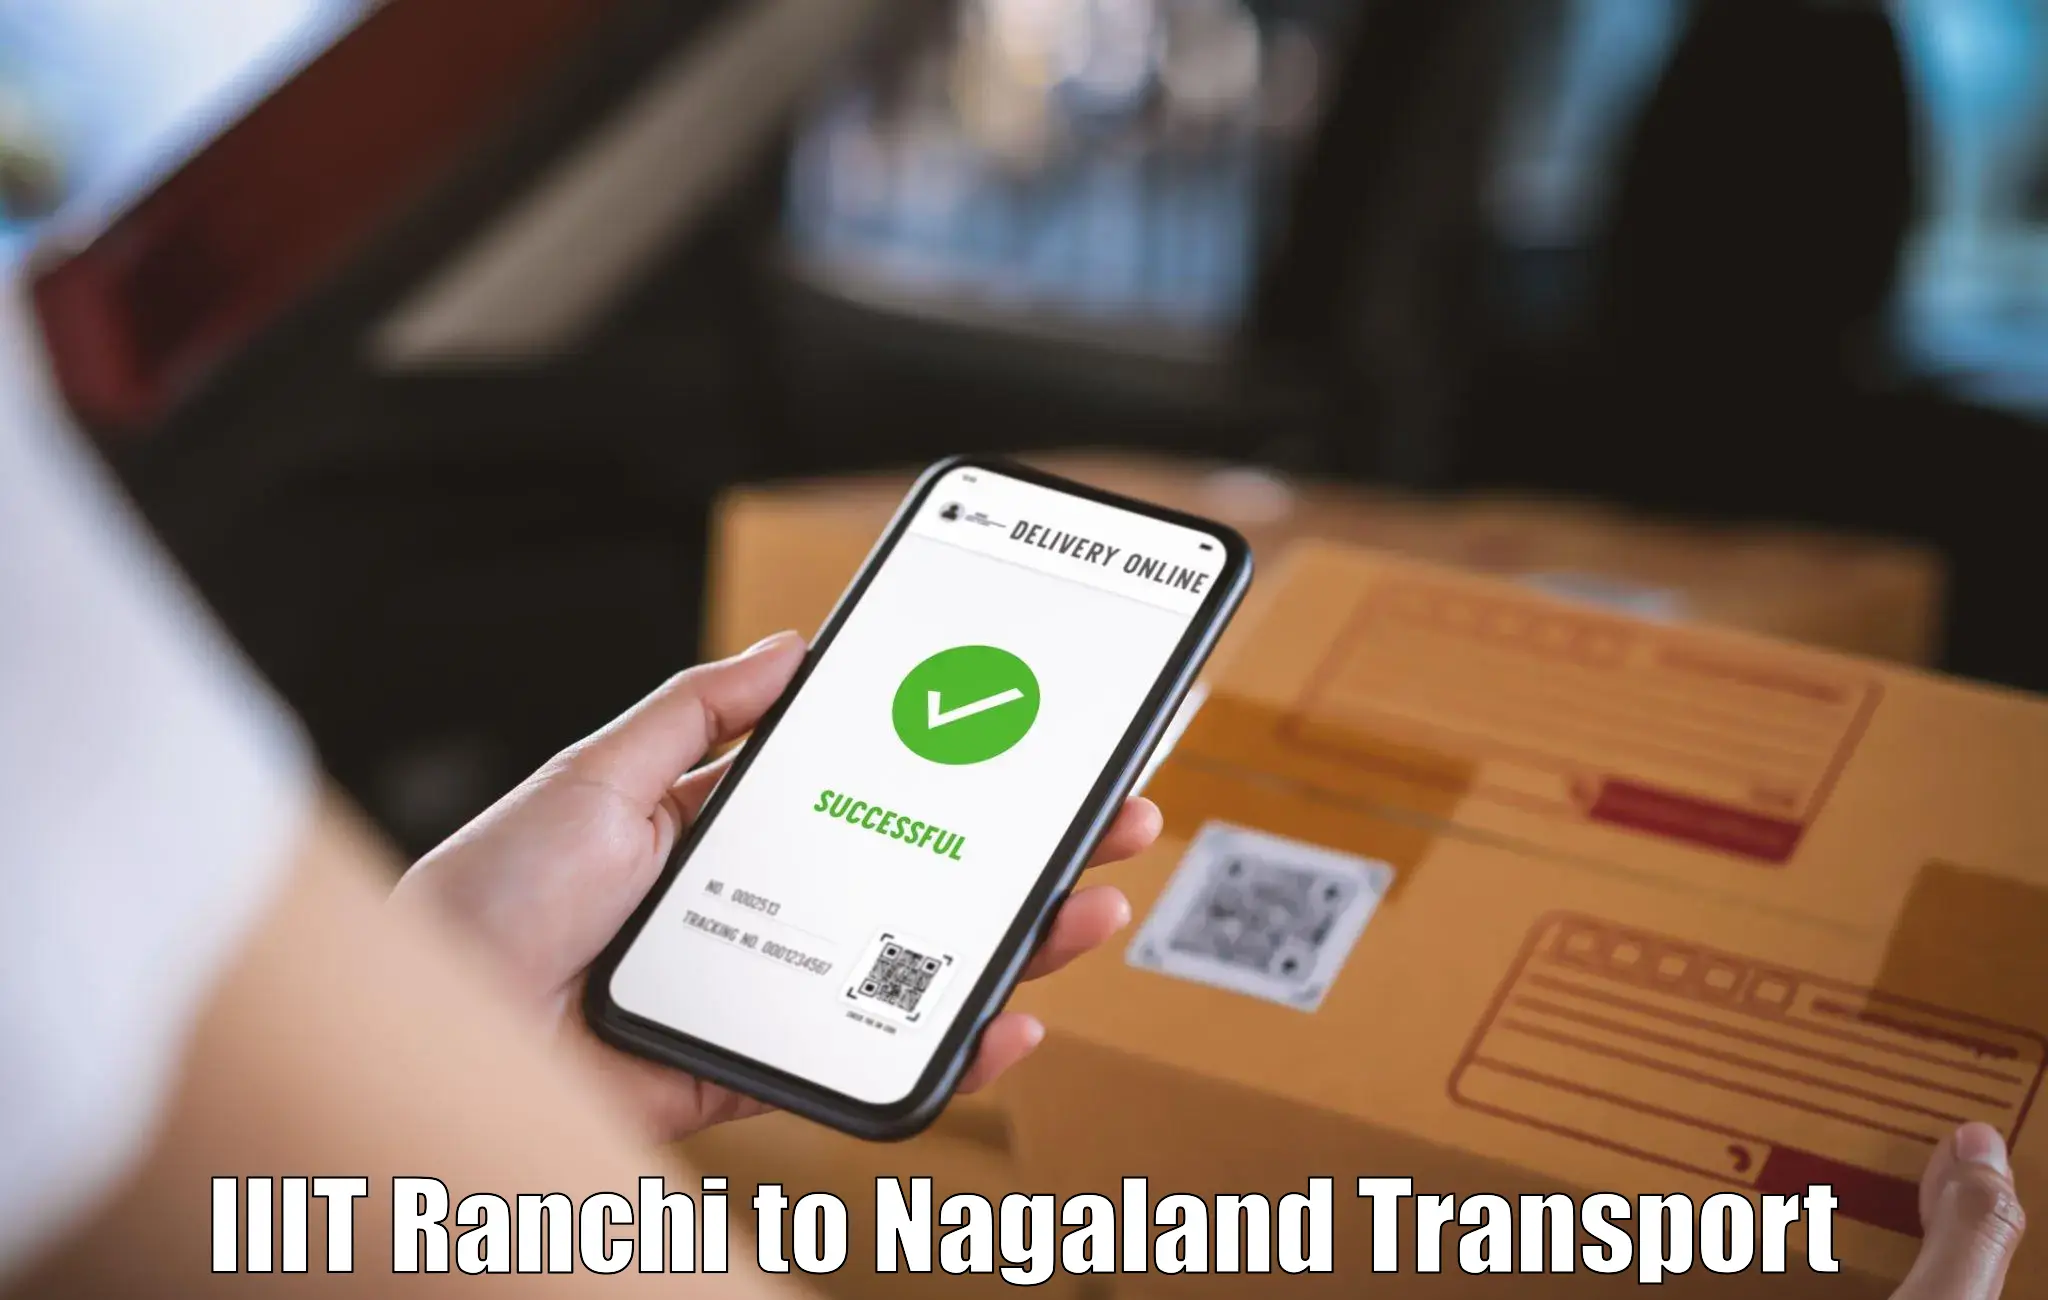 Express transport services IIIT Ranchi to Nagaland